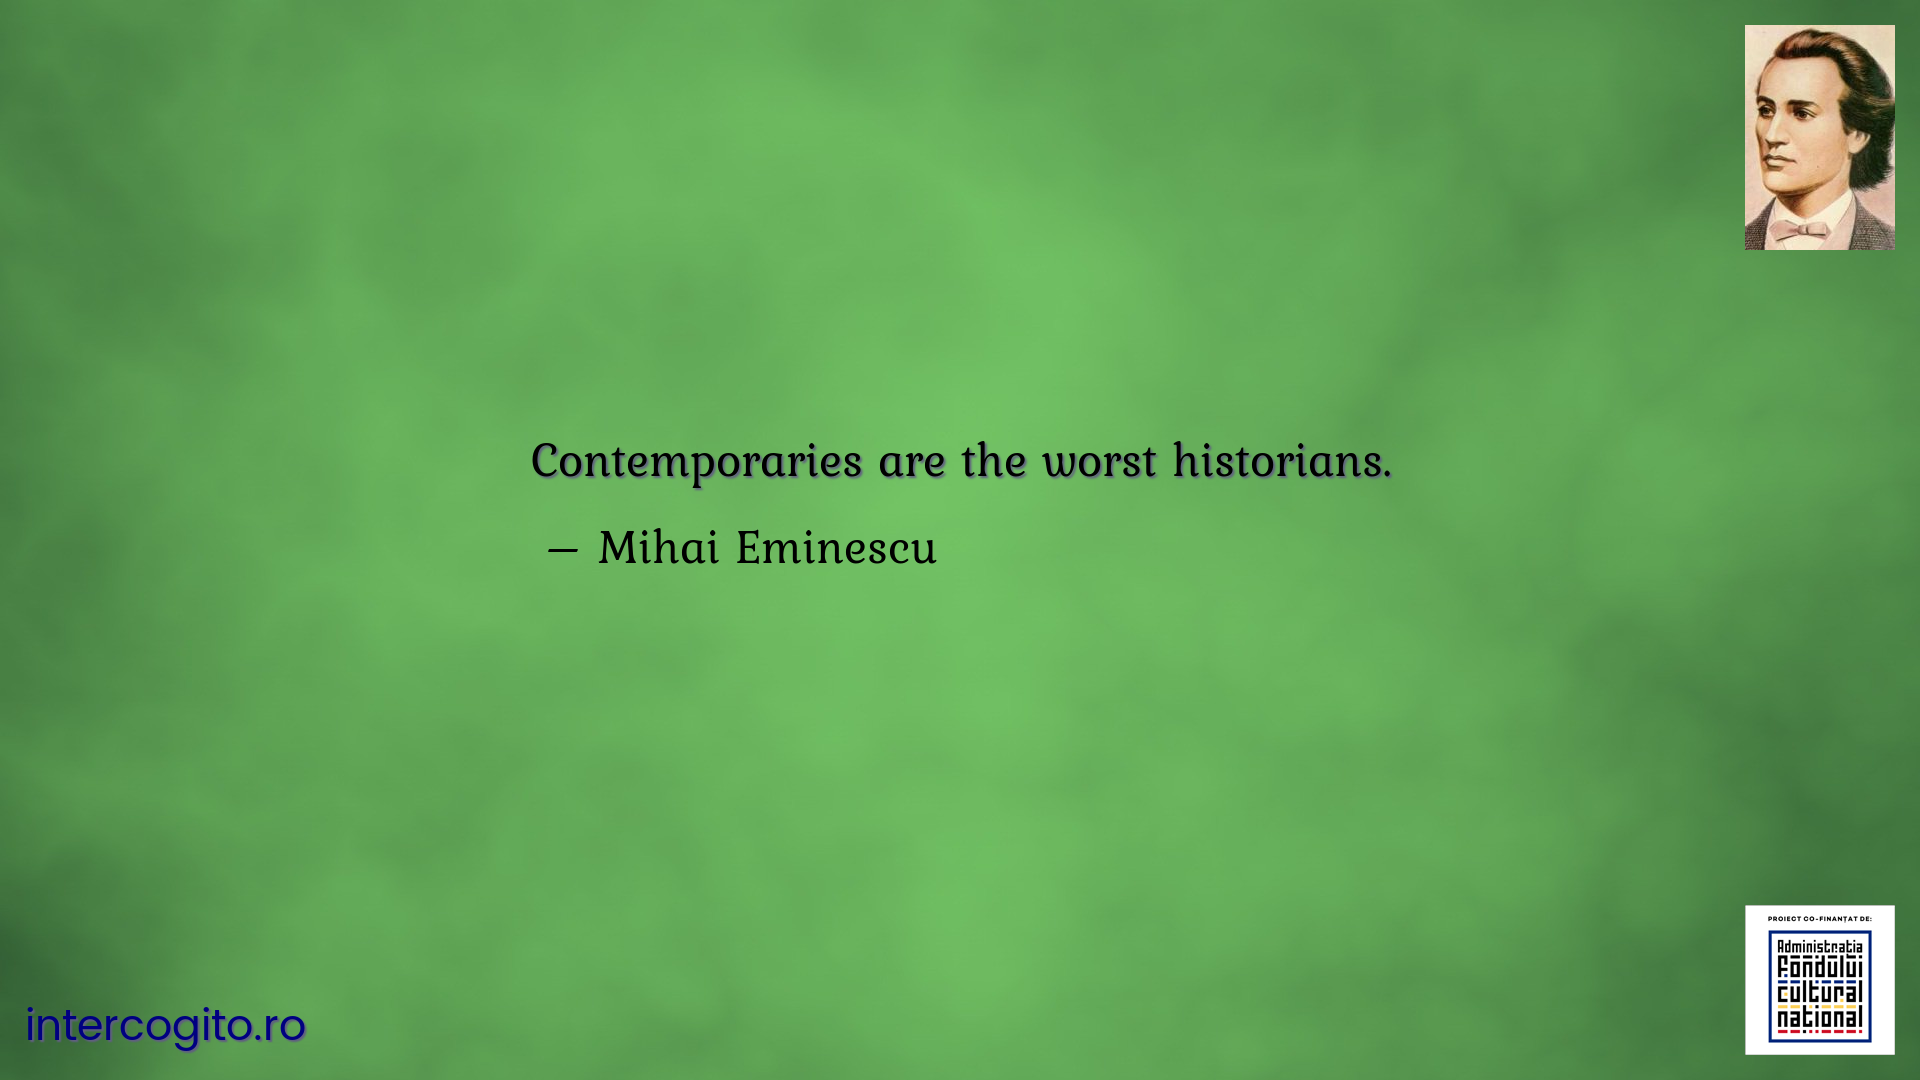 Contemporaries are the worst historians.